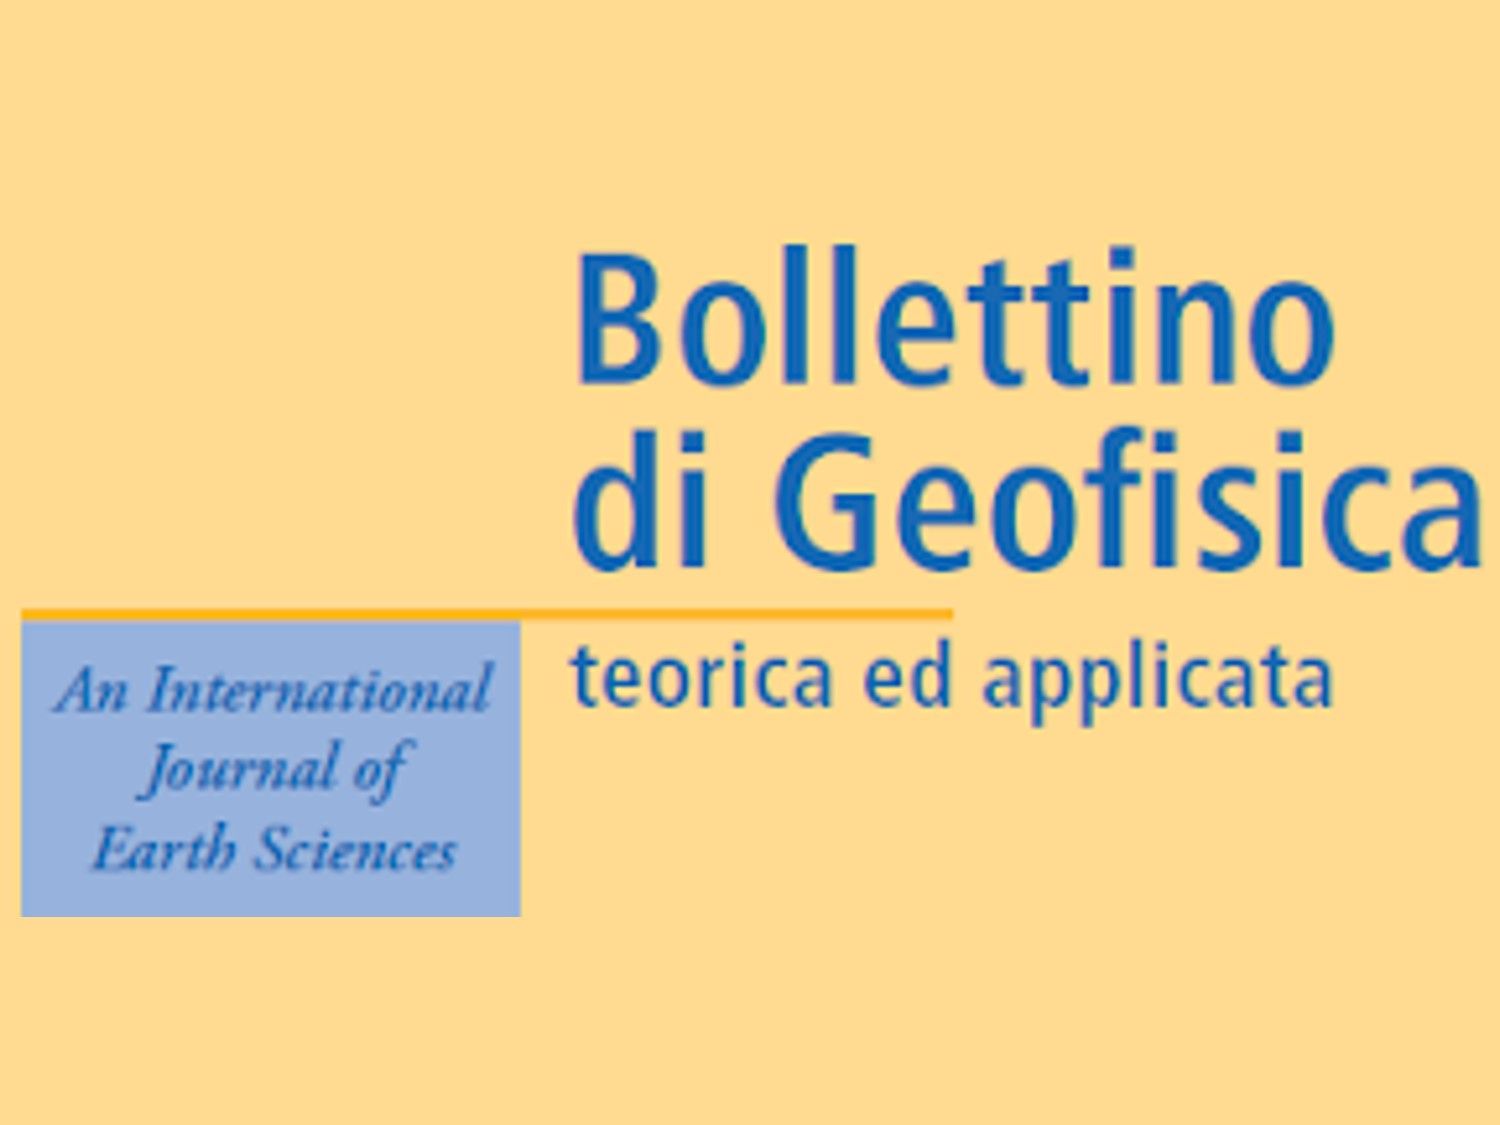 The ASSESS project: assessment for seismic risk reduction of school buildings in the Friuli Venezia Giulia region (NE Italy)